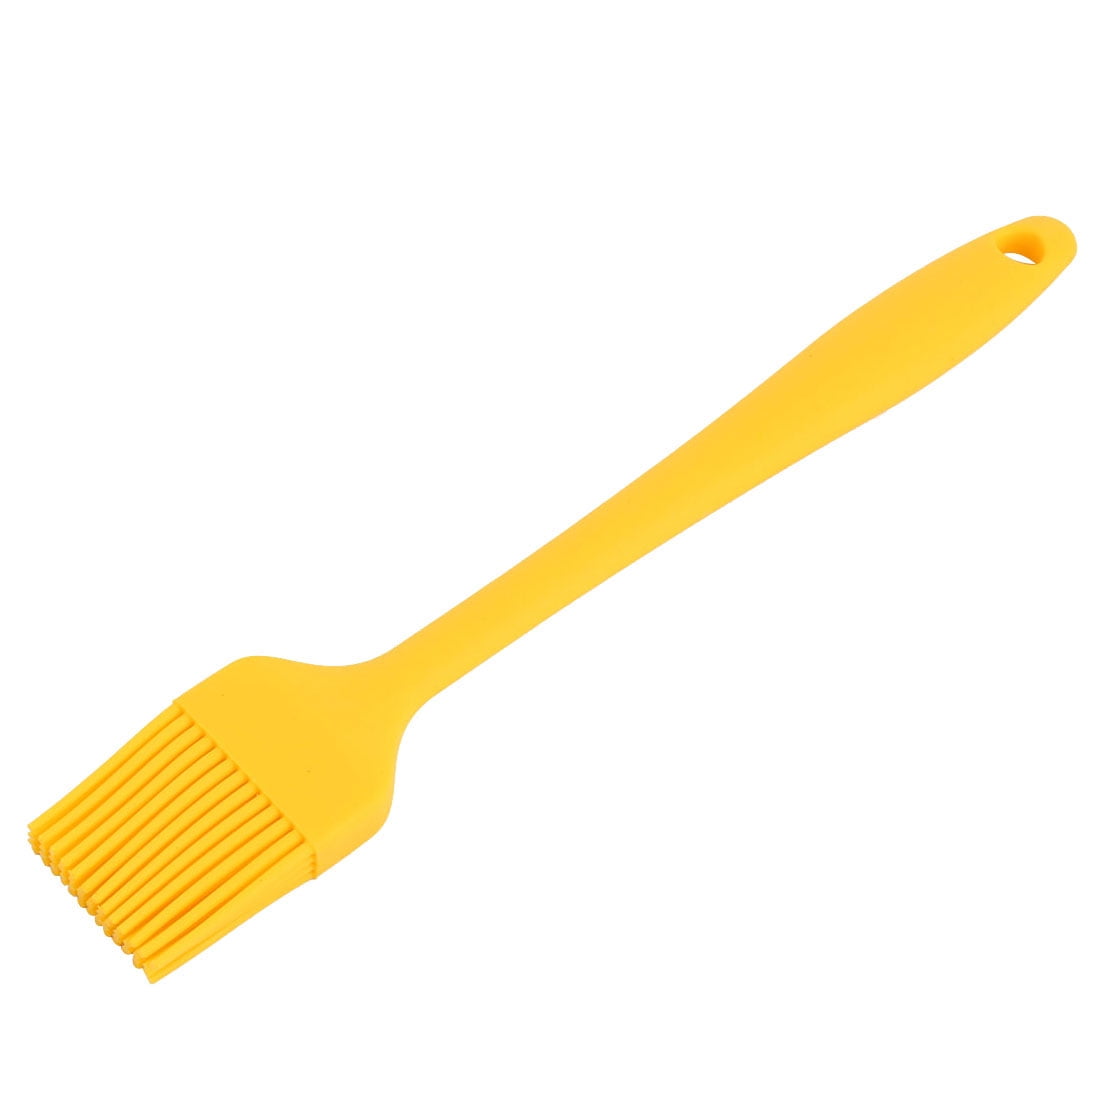 2 Pastry brushes »Woody«, 1 + 1.5 inches - Westmark Shop